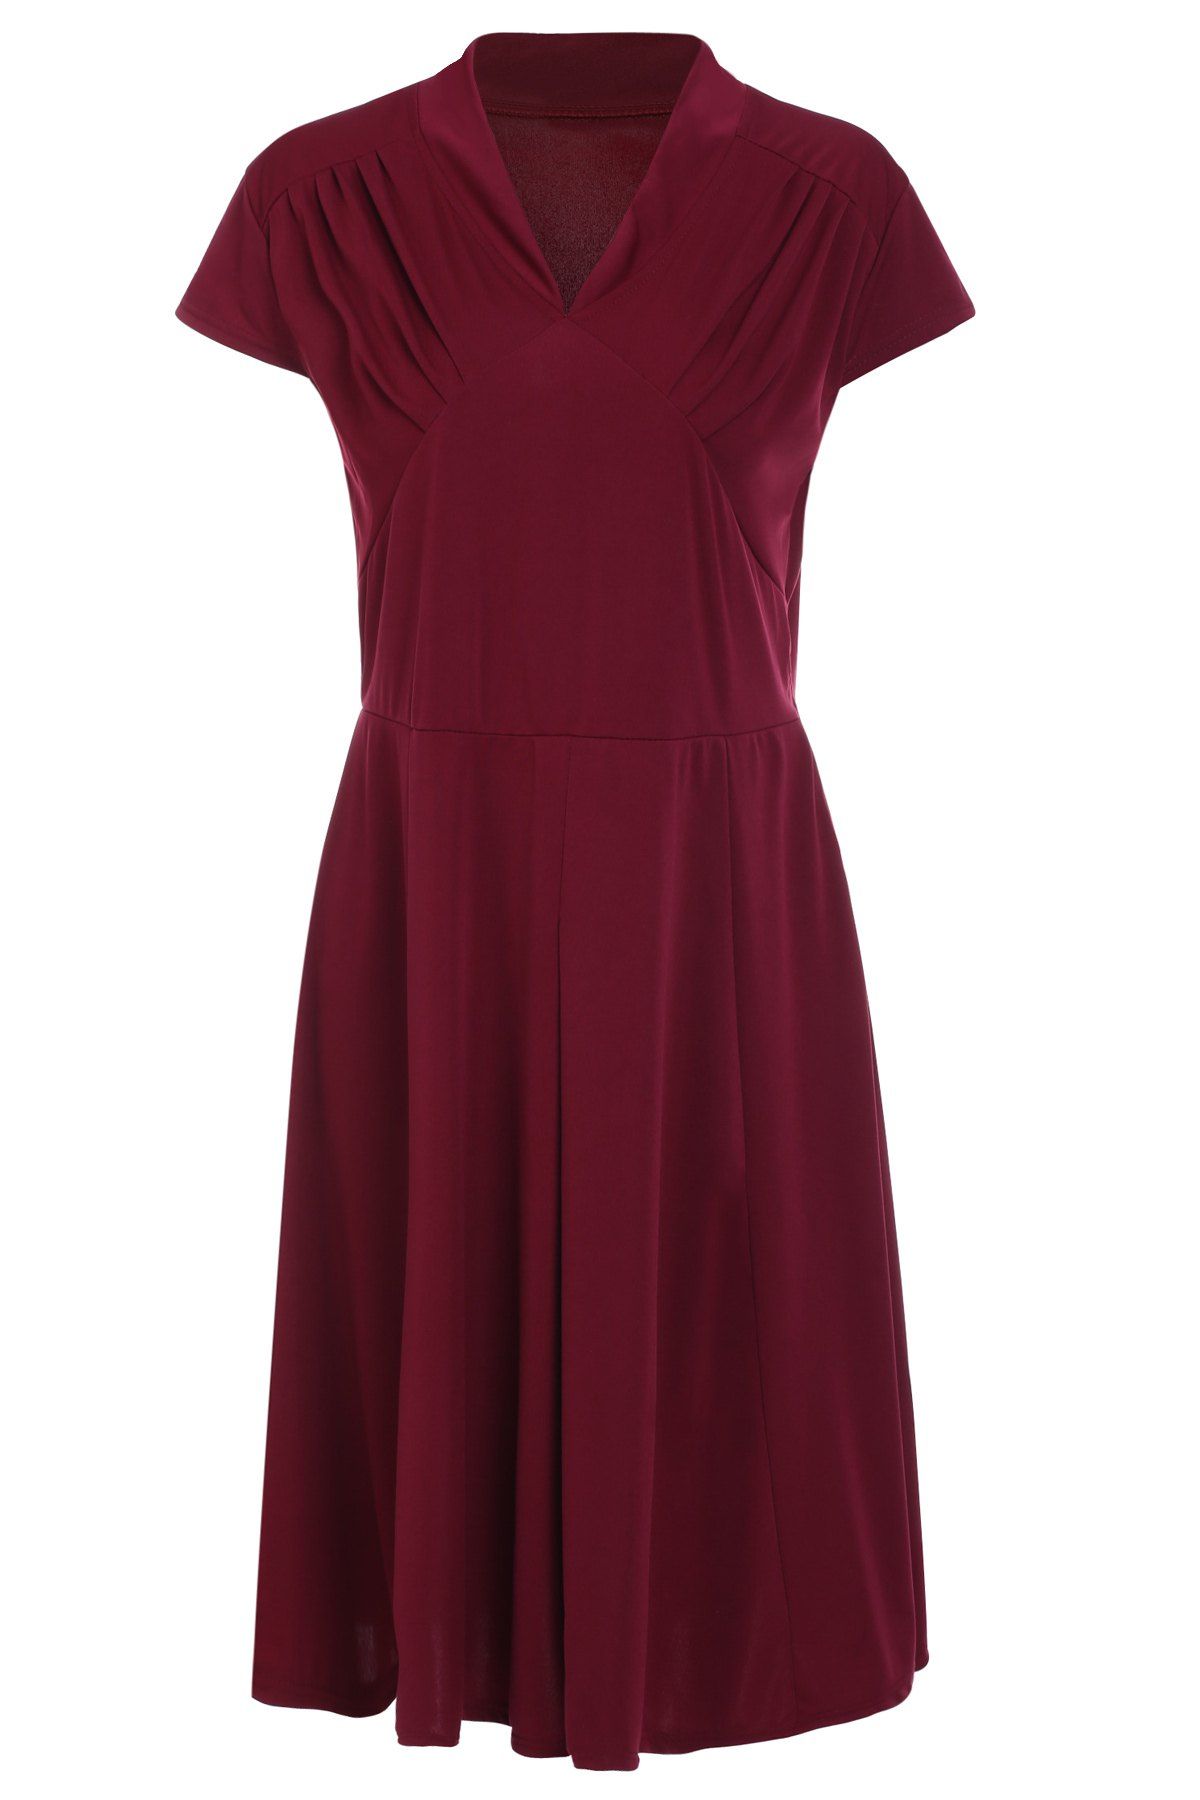 Retro Style Wine Red V-Neck Short Sleeve Dress For Women, WINE RED, 2XL ...